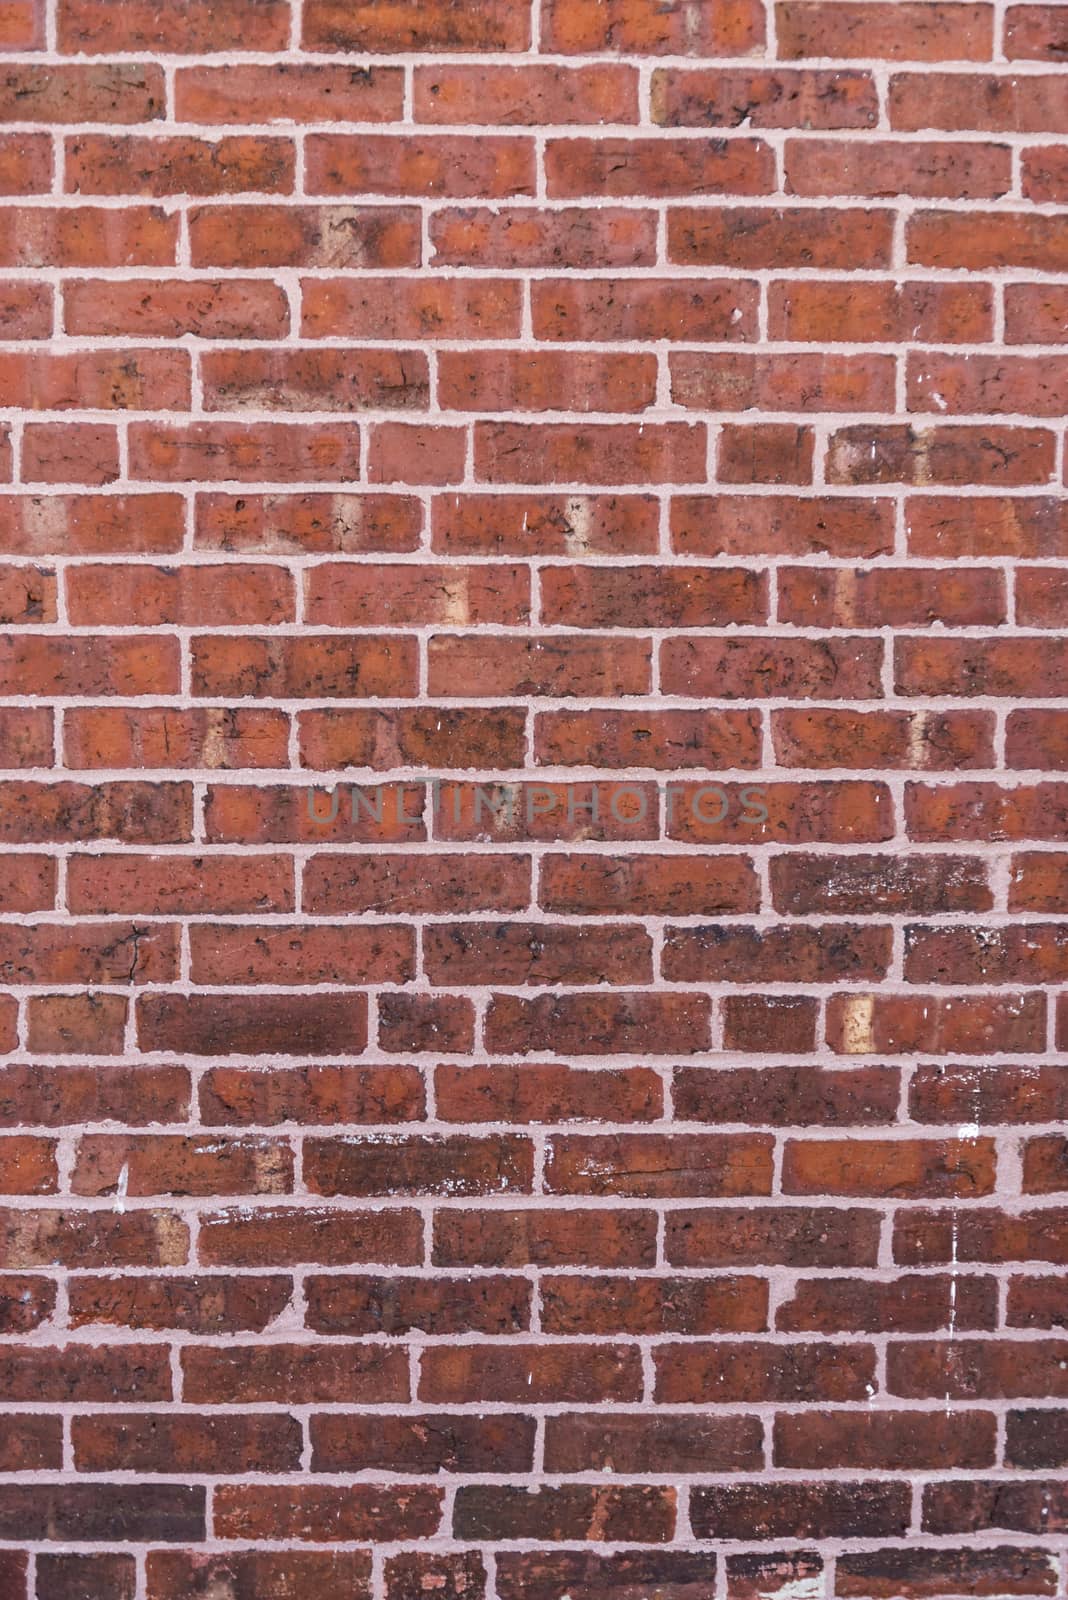 Background of red brick wall texture taken in America